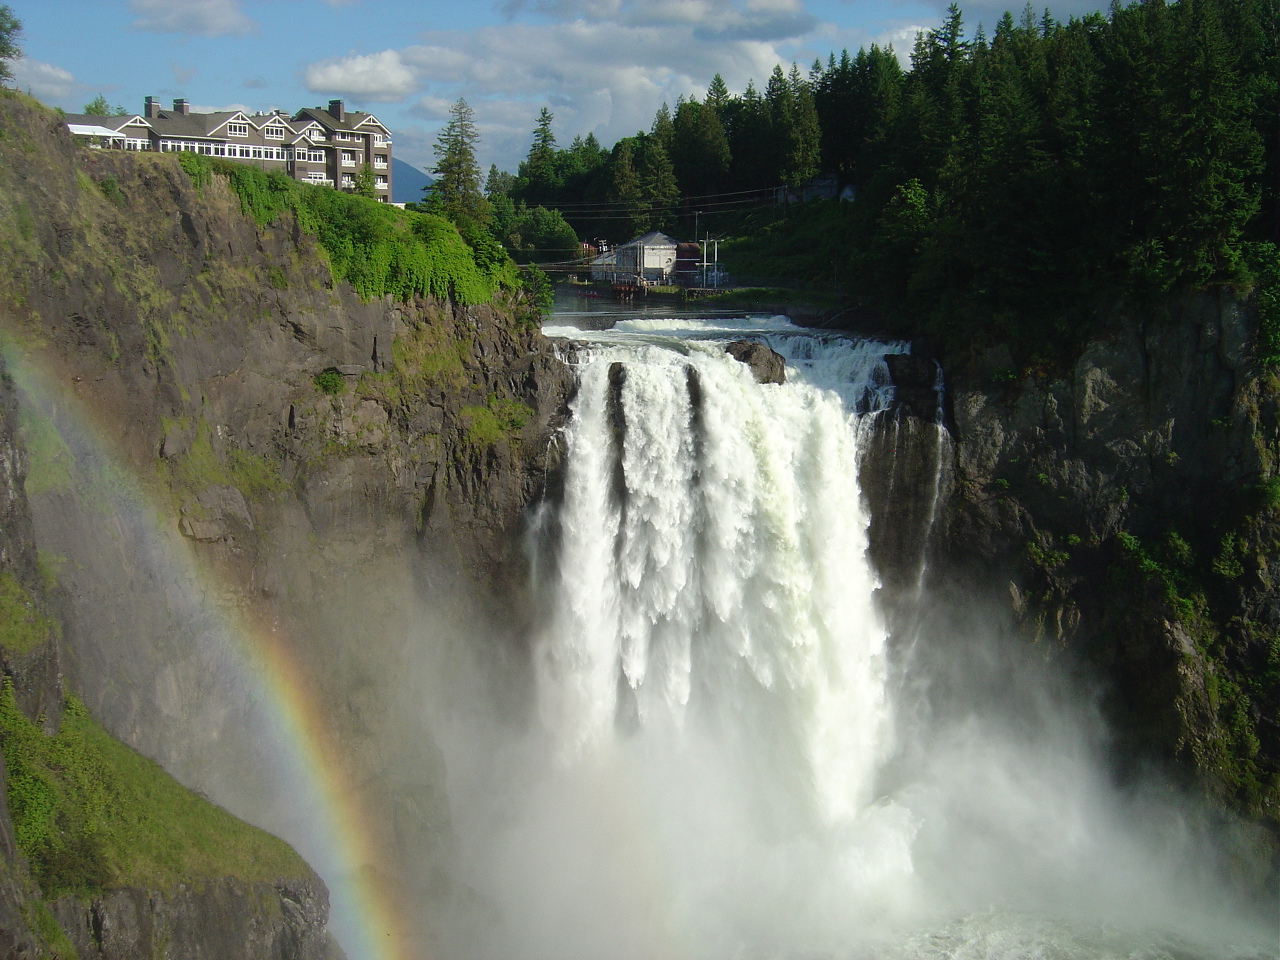 Snoqualmie Falls is featured notably in Twin Peaks